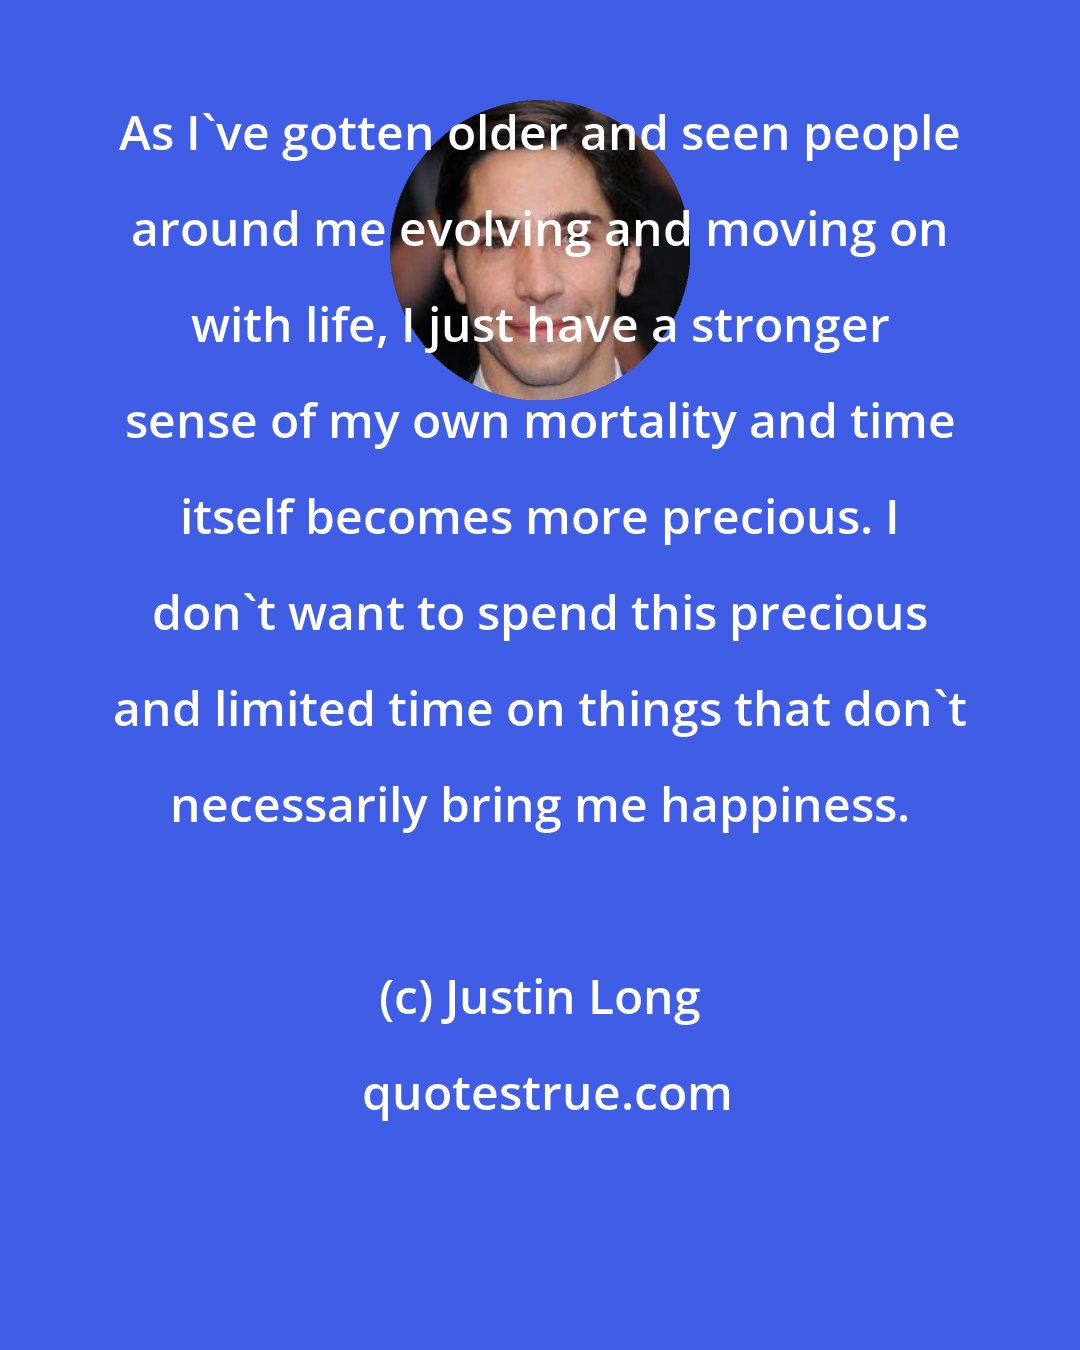 Justin Long: As I've gotten older and seen people around me evolving and moving on with life, I just have a stronger sense of my own mortality and time itself becomes more precious. I don't want to spend this precious and limited time on things that don't necessarily bring me happiness.